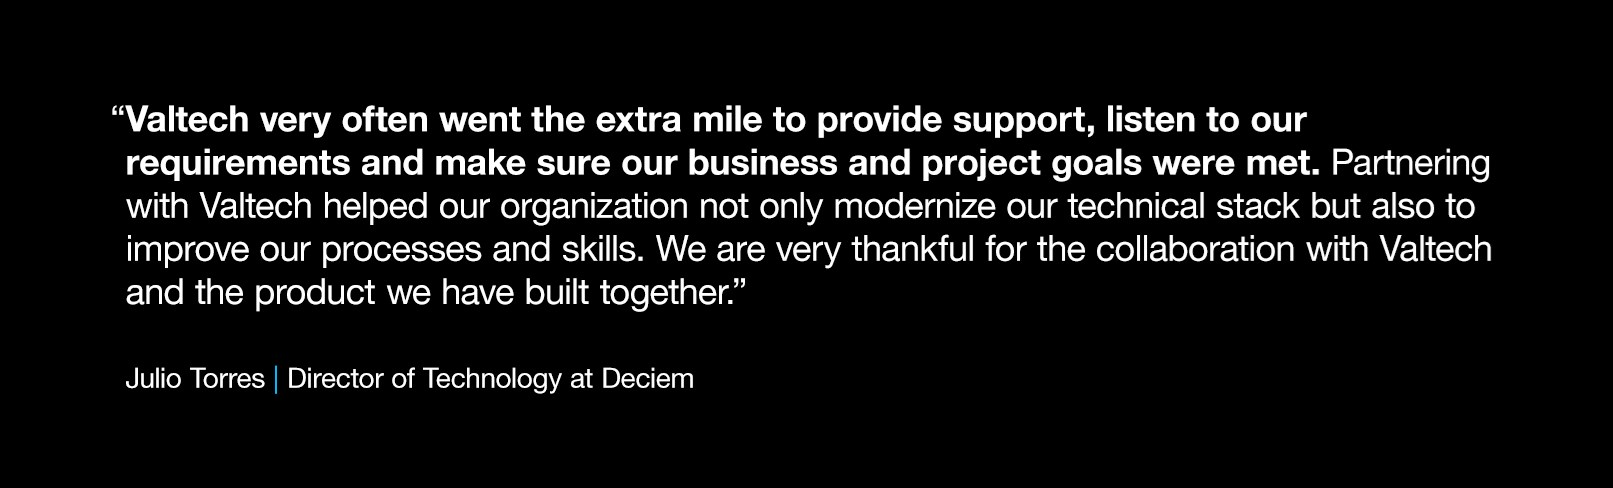 Quote on black background reads “Valtech very often went the extra mile to provide support, listen to our requirements and make sure our business and project goals were met. Partnering with Valtech helped our organization not only modernize our technical stack but also to improve our processes and skills. We are very thankful for the collaboration with Valtech and the product we have built together.” -- Julio Torres, Director of Technology